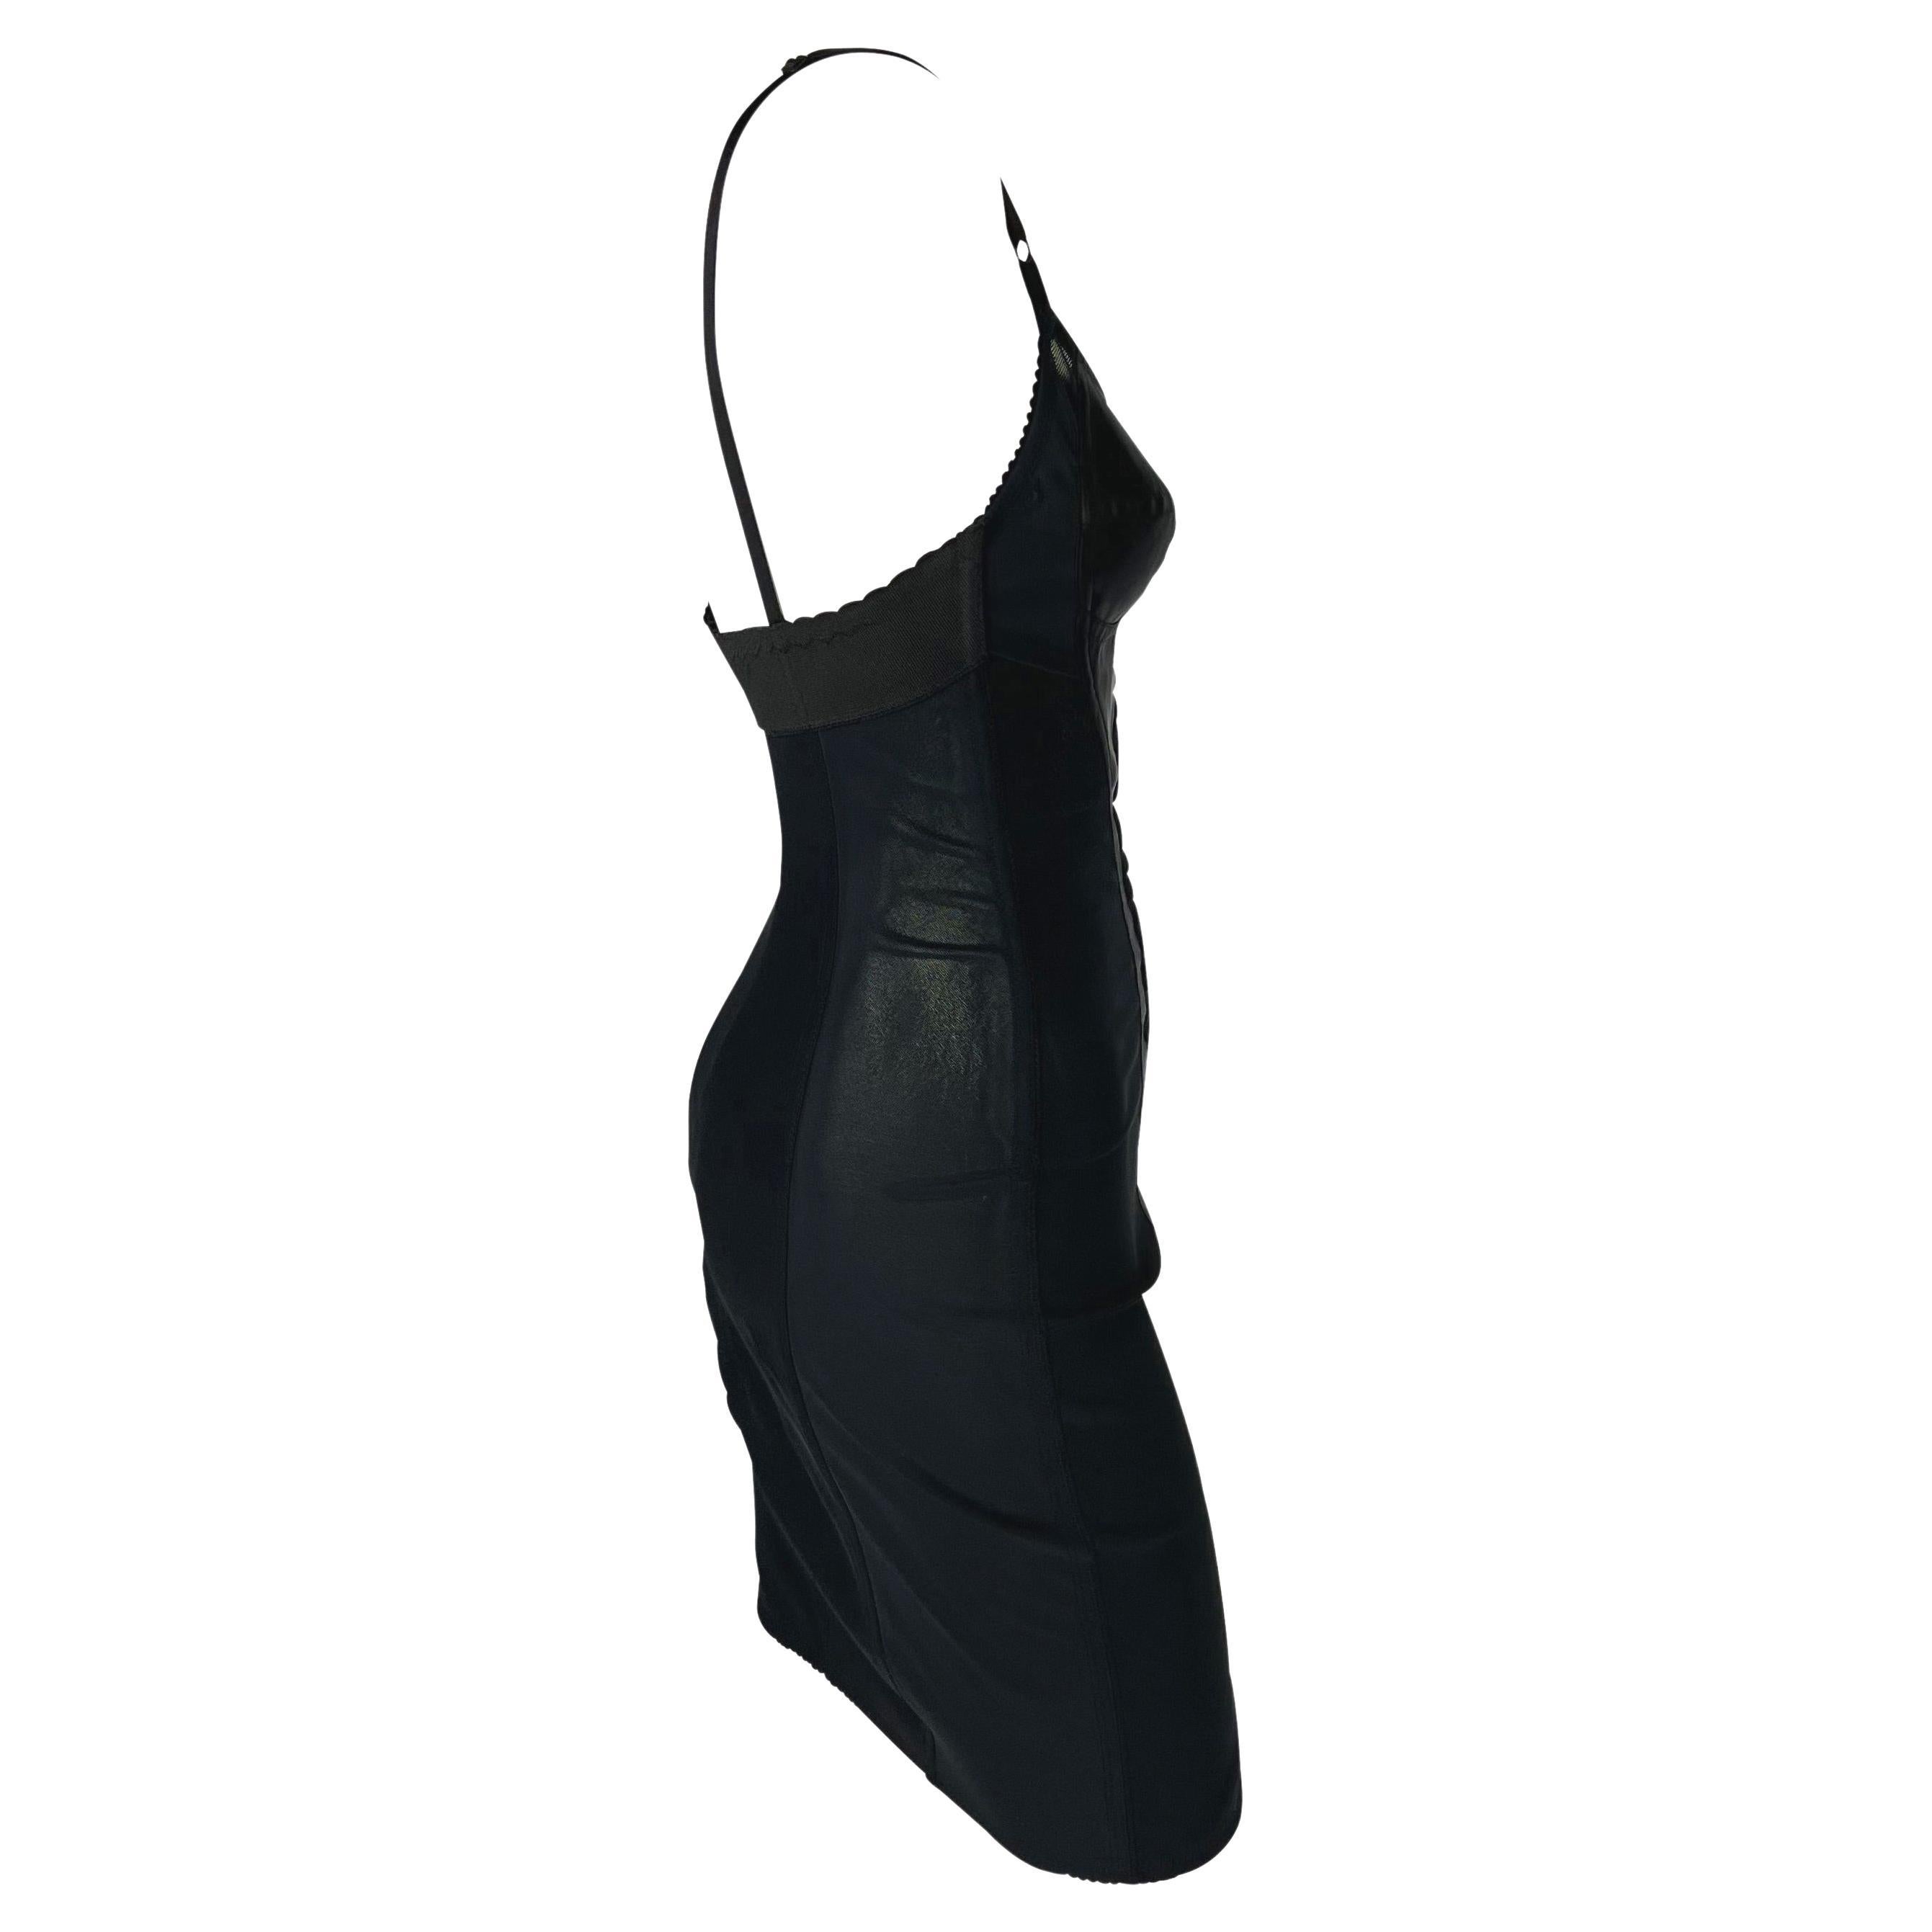 S/S 2003 Dolce & Gabbana 'Sex & Love' Sheer Bustier Satin Panel Corset Dress In Good Condition For Sale In West Hollywood, CA